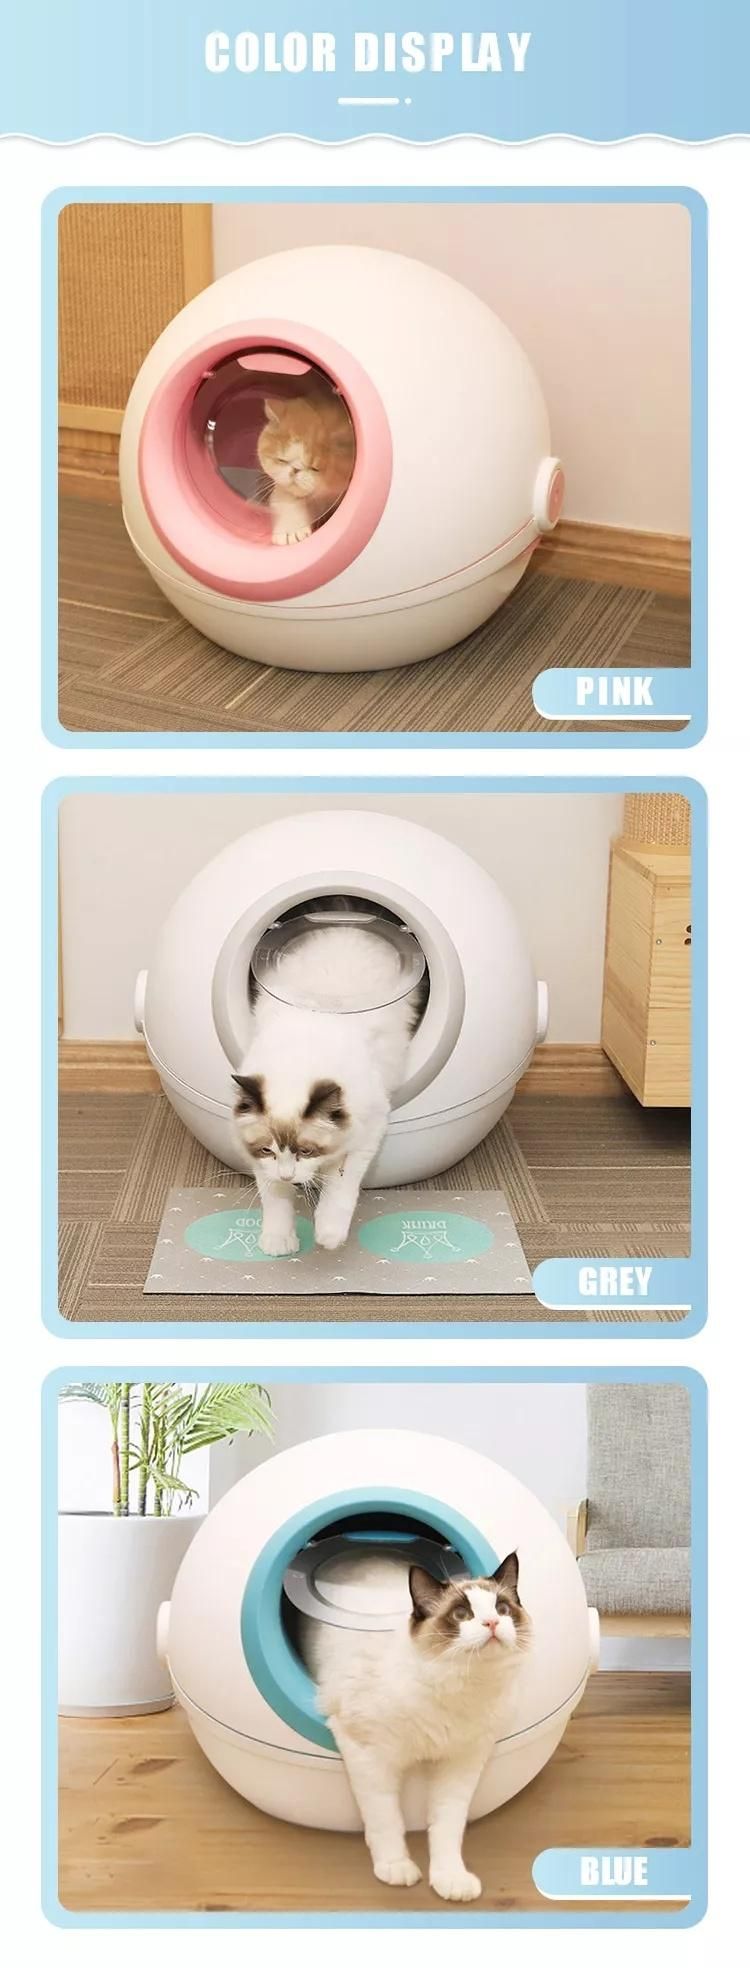 Cat Poop Storage Box Clean Cat Litter Box Cat Toilet with Lid Can Be Opened for Easy Cleaning